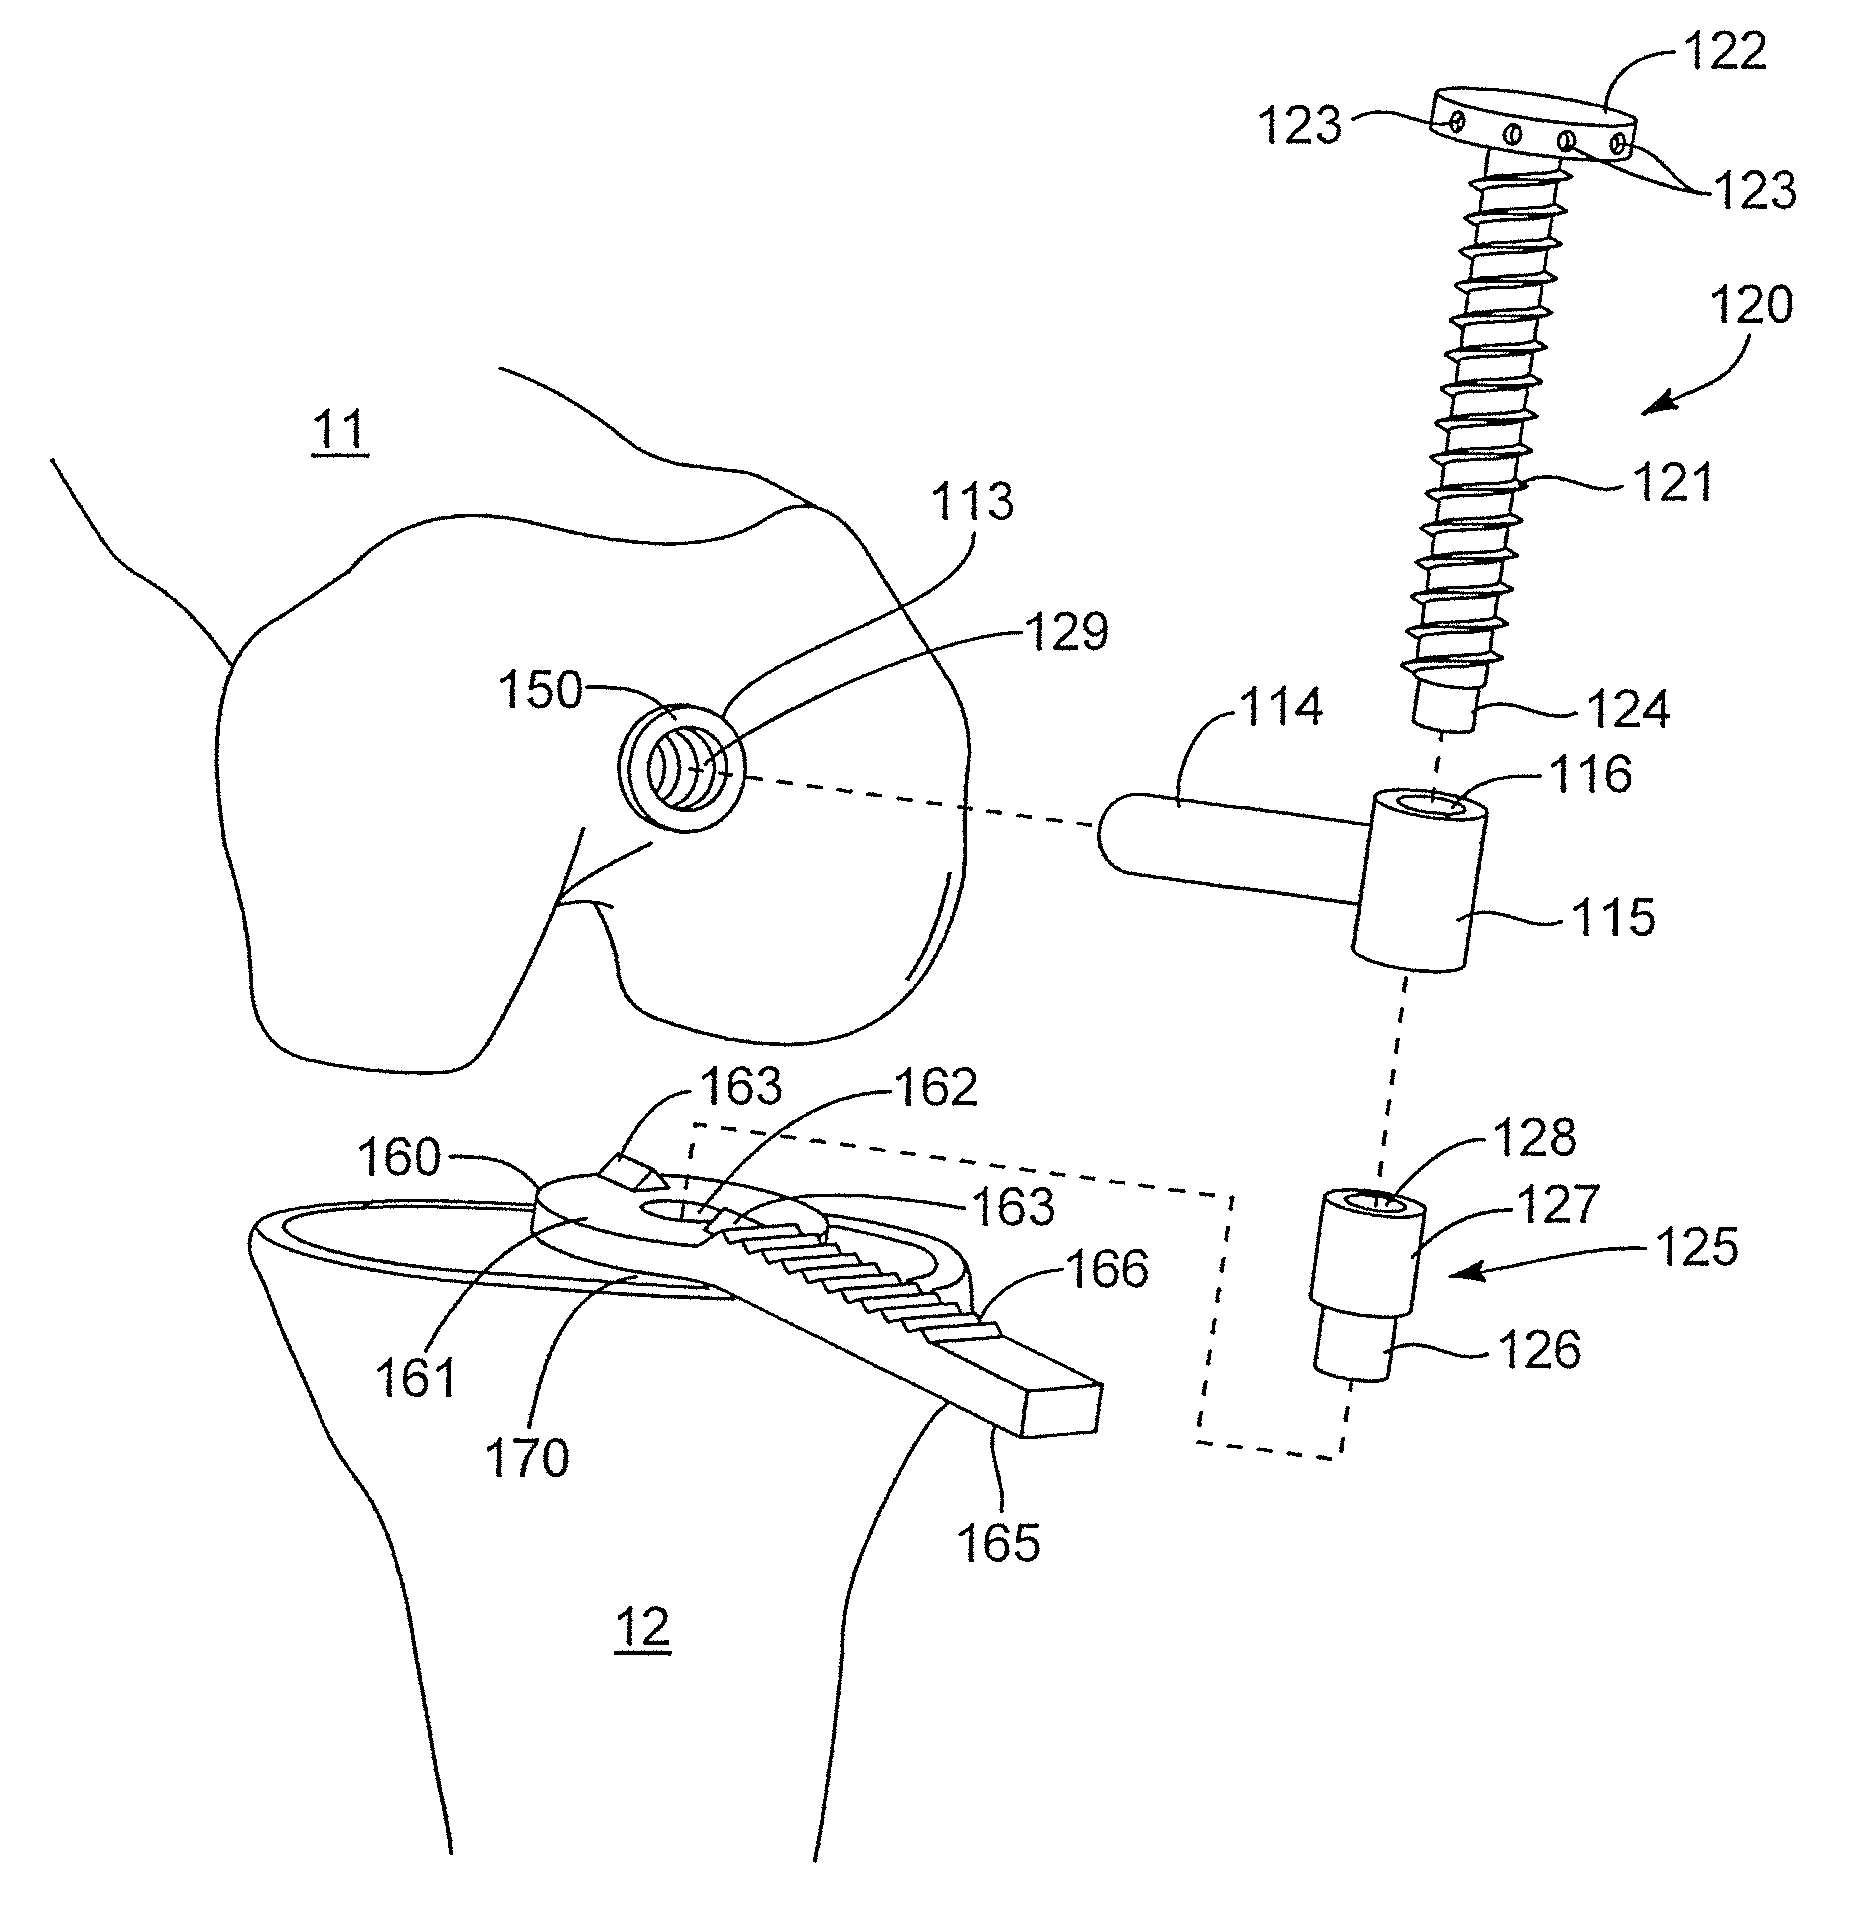 Systems and methods for guiding cuts to a femur and tibia during a knee arthroplasty